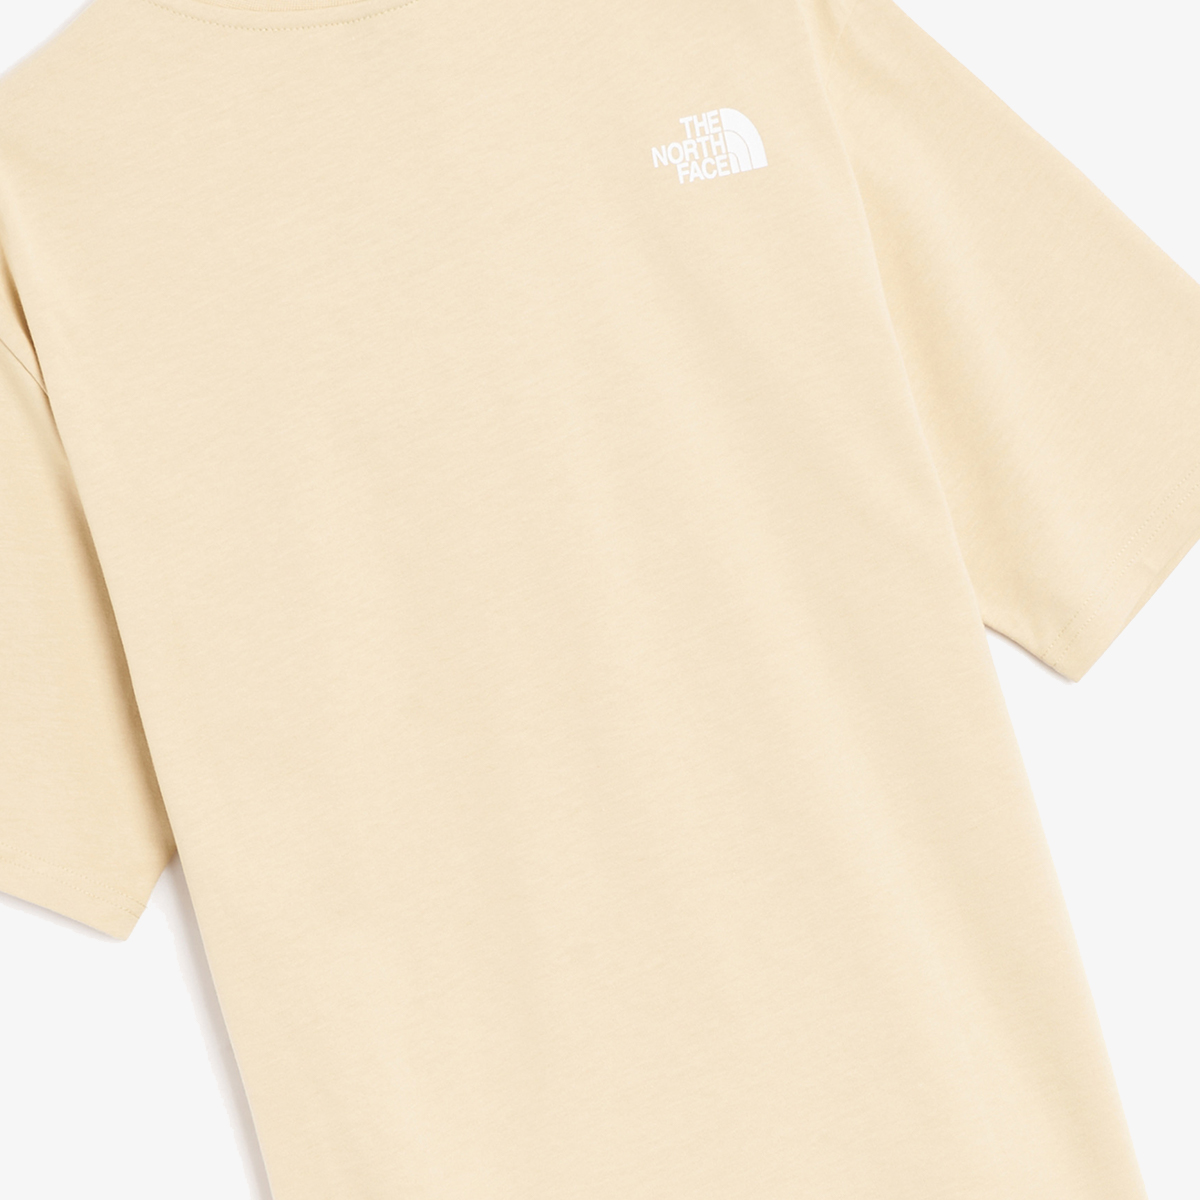 THE NORTH FACE Majica Men’s Nse Patch Tee 